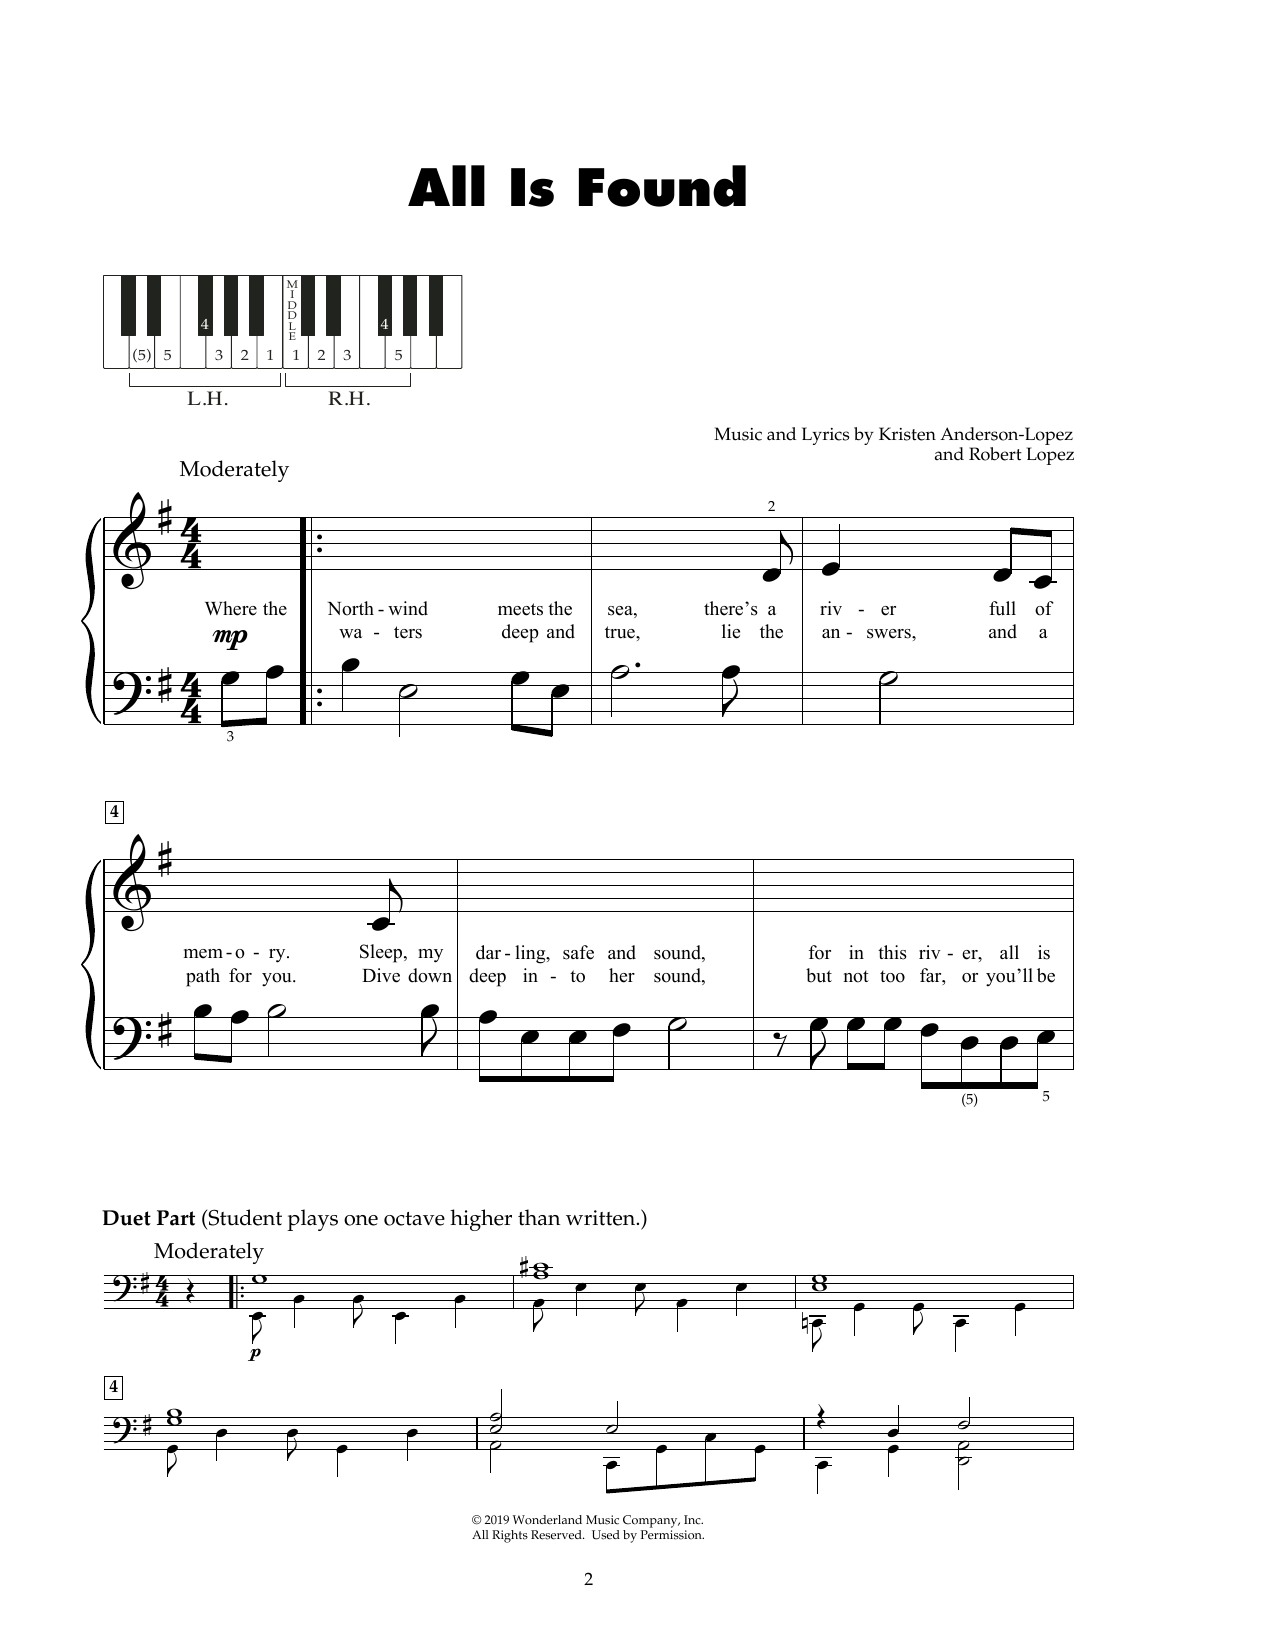 Download Kristen Anderson-Lopez & Robert Lope All Is Found (from Frozen 2) Sheet Music